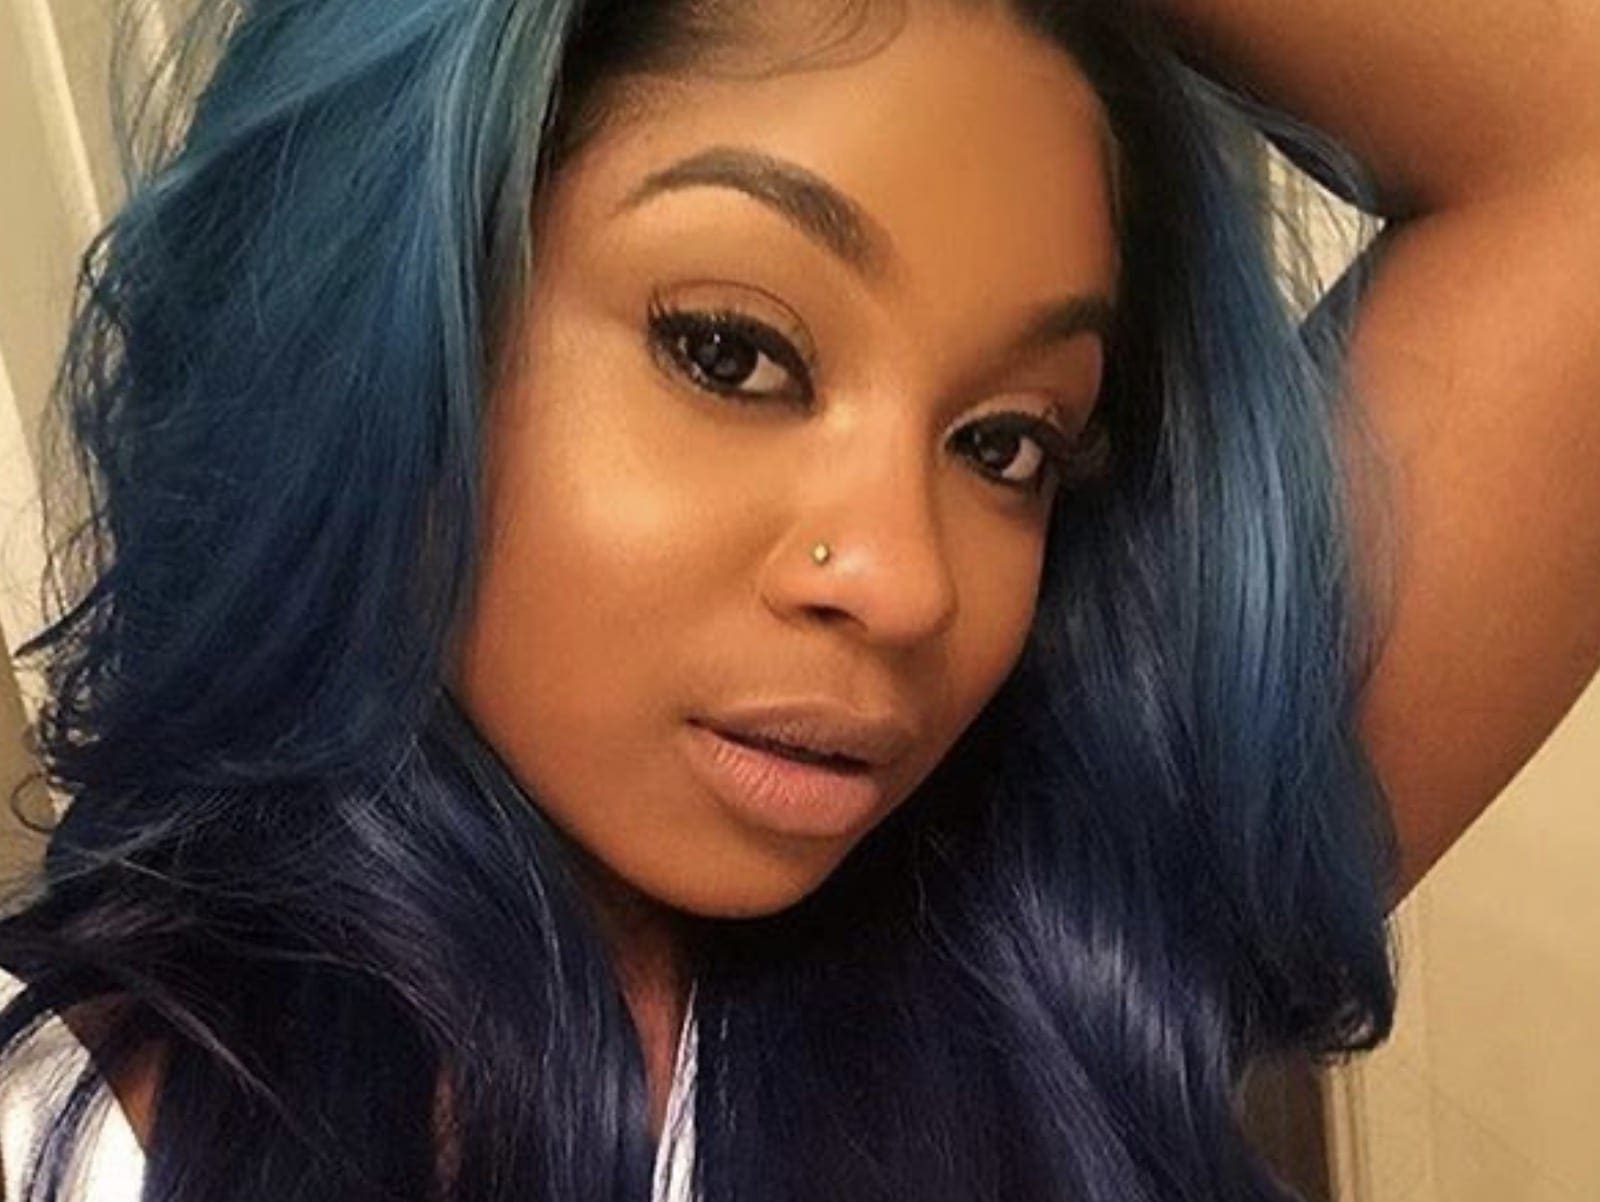 Reginae Carter Celebrates The Birthday Of YFN Lucci - See Their Pics Together